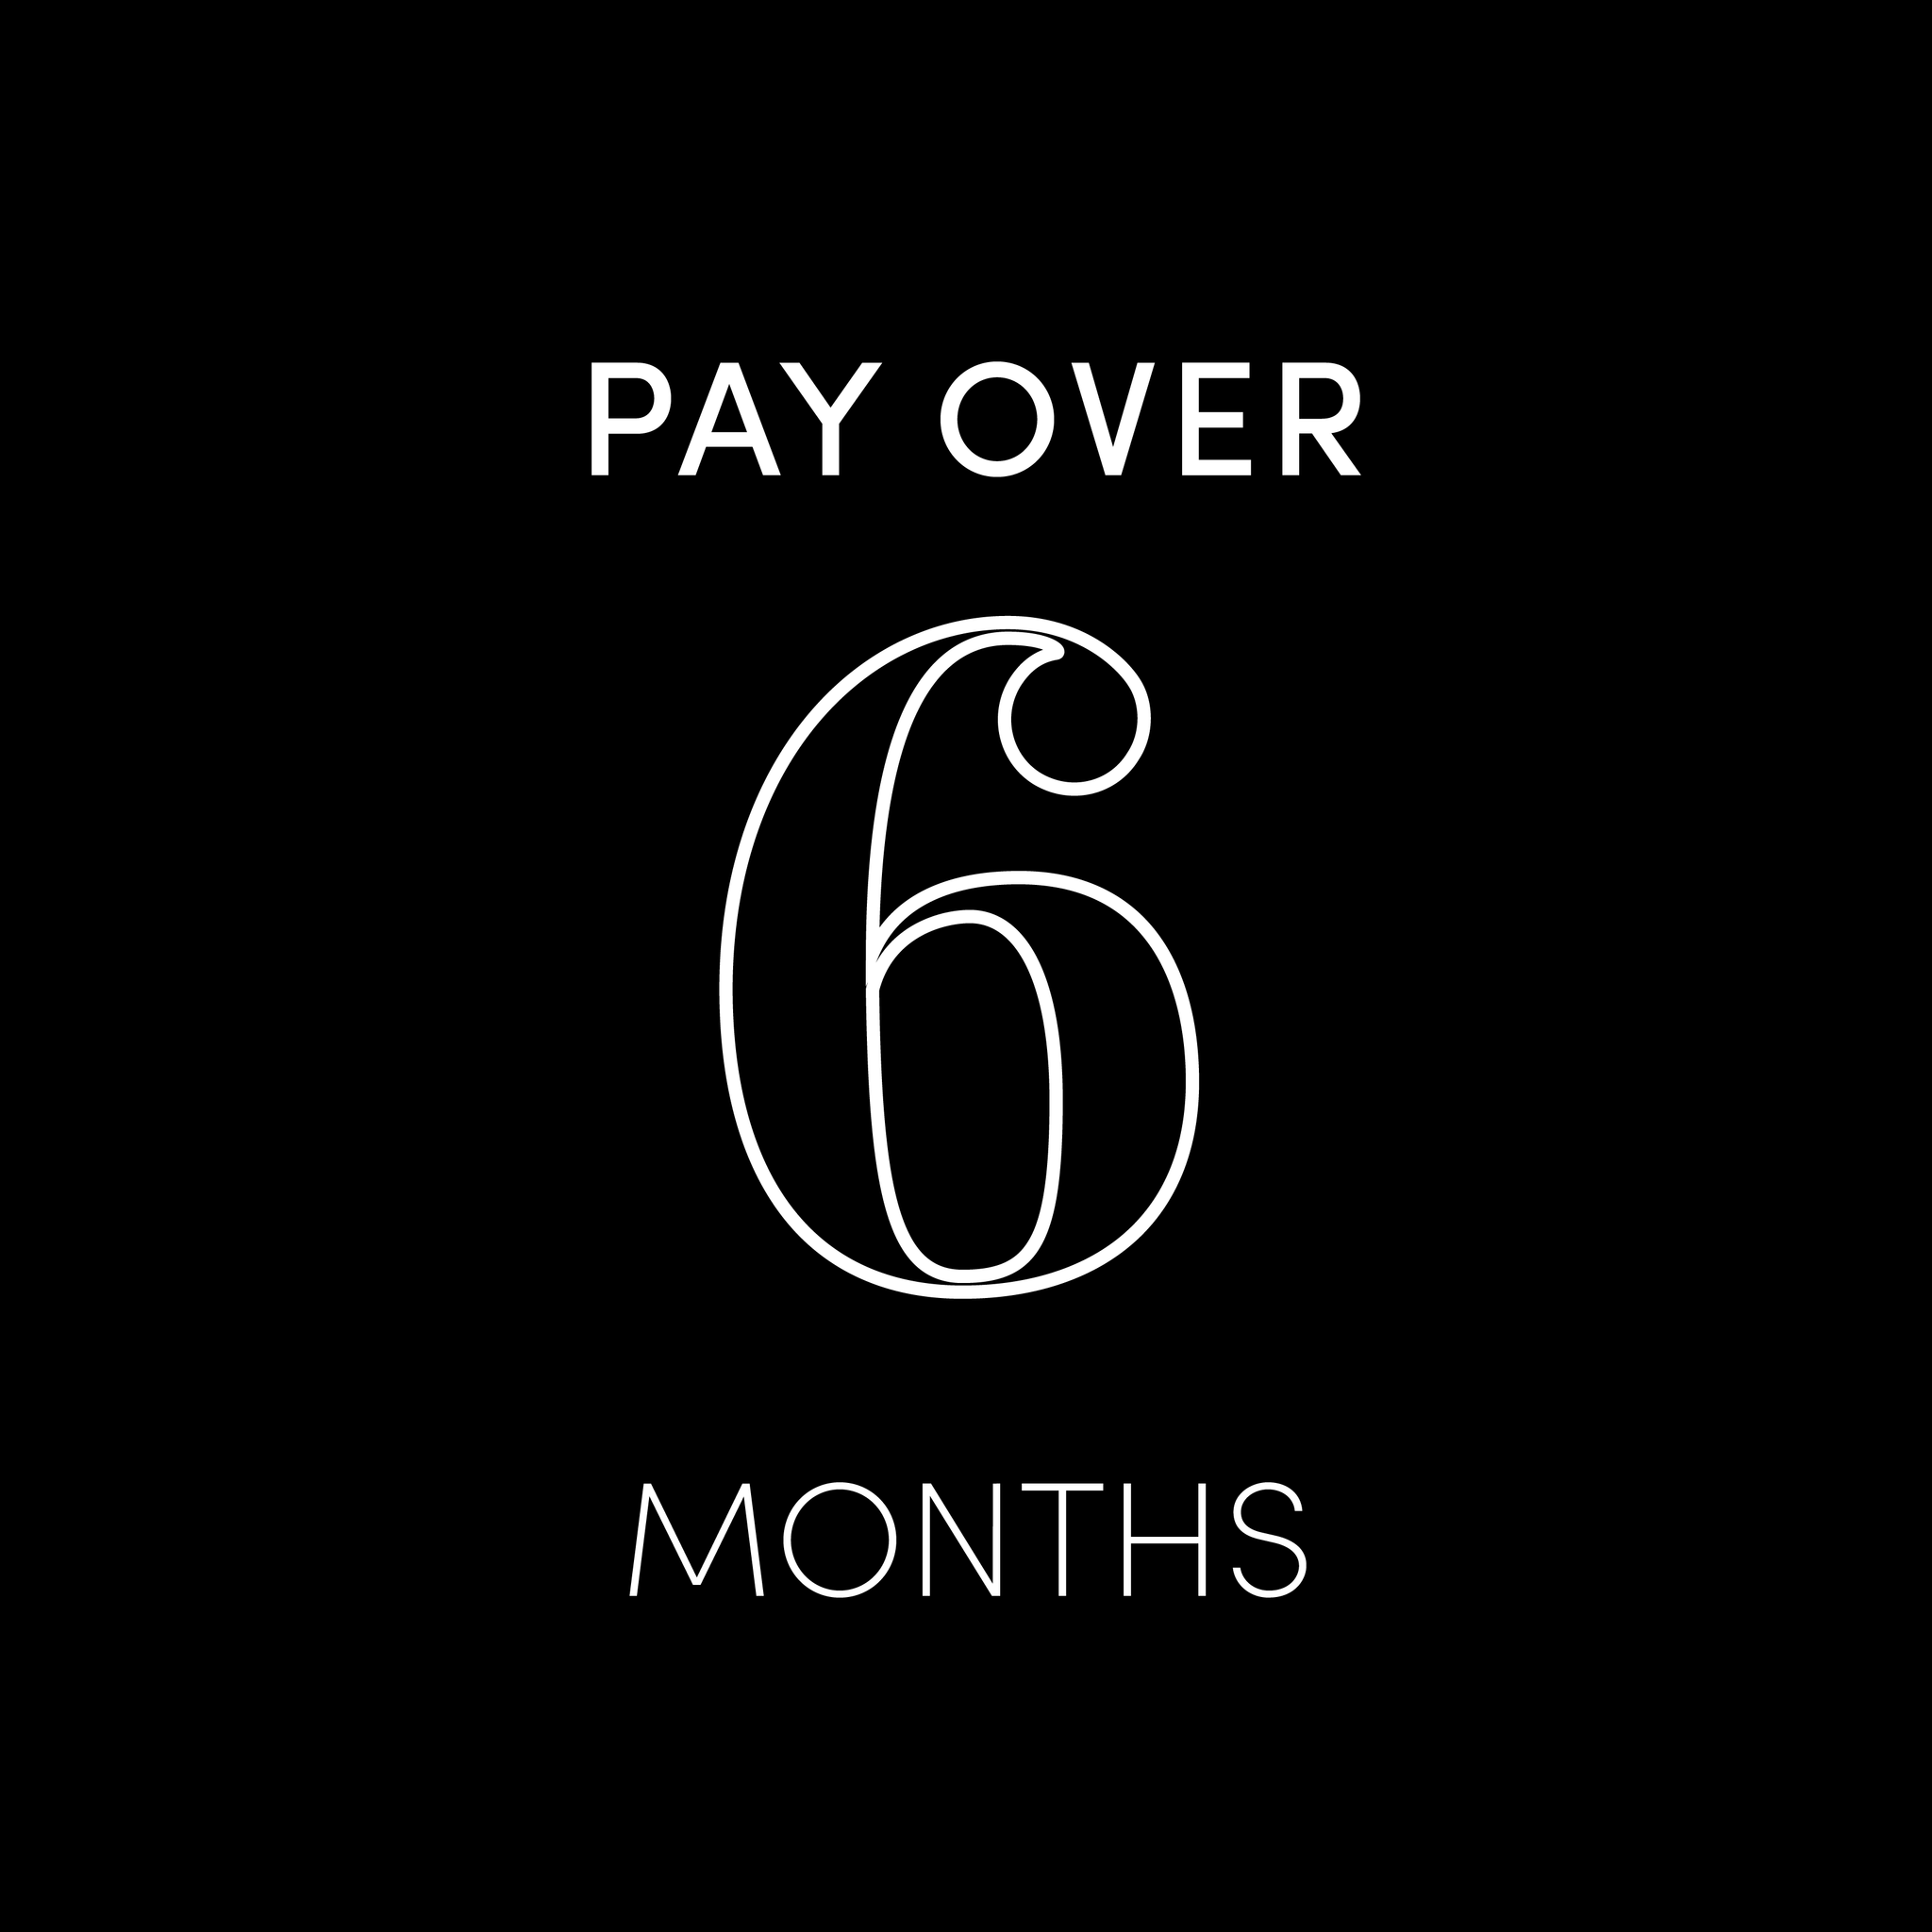 Pay over 6 months